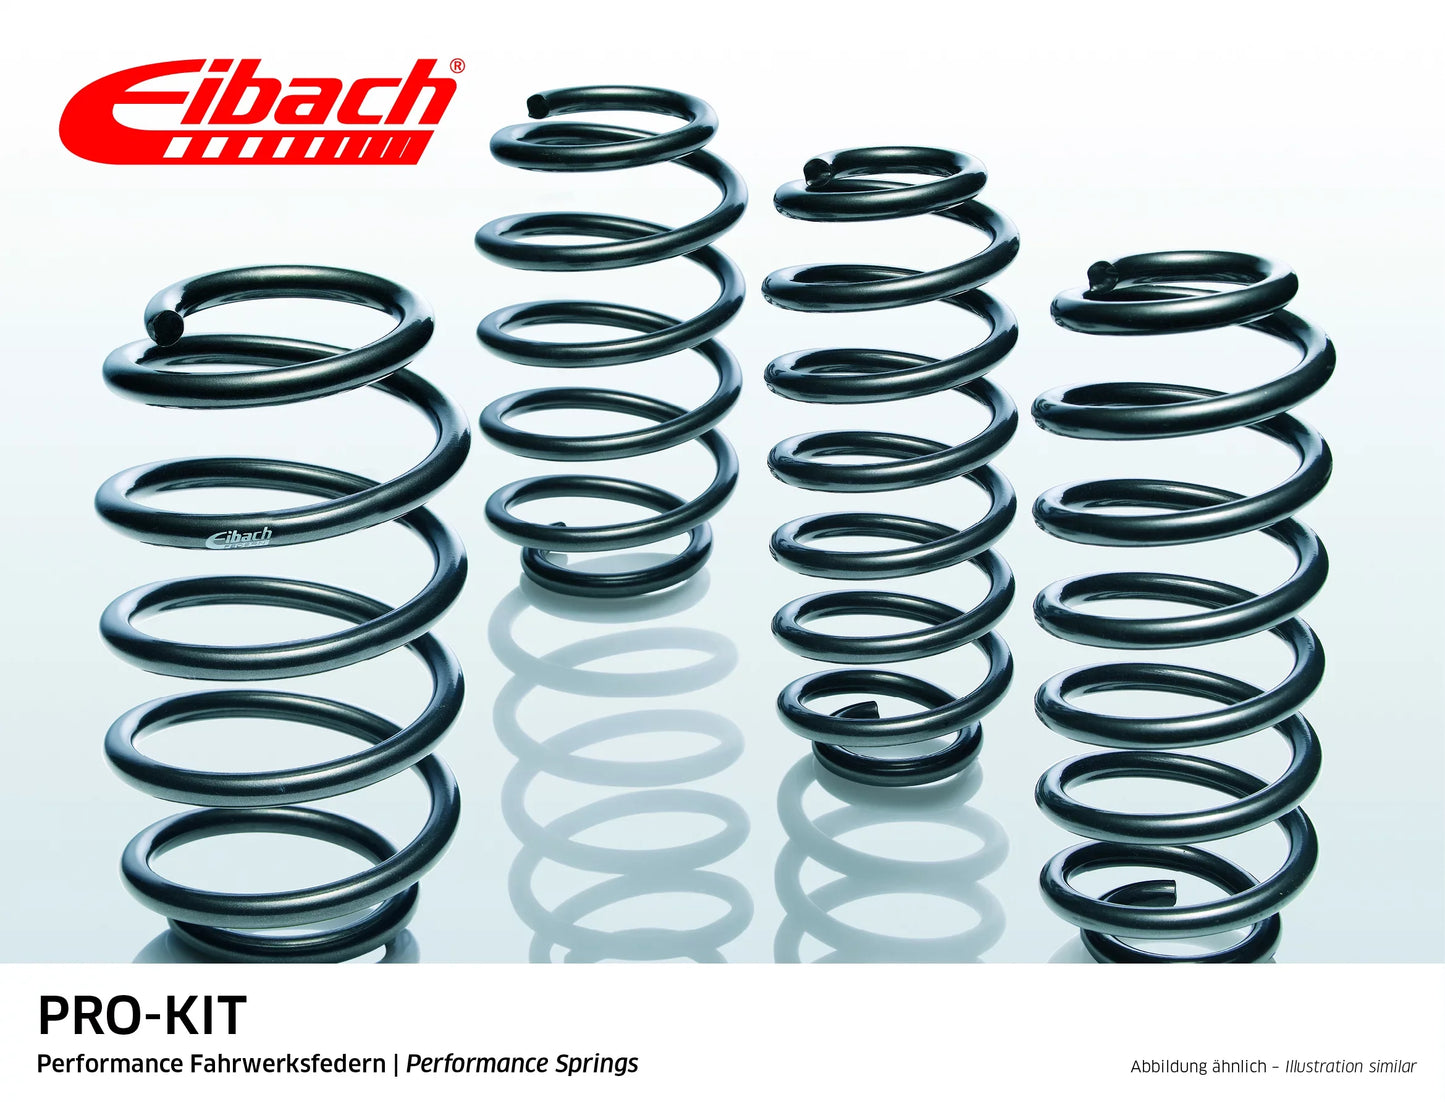 Eibach Pro-Kit Lowering Springs (E10-35-030-04-22) at £315.12